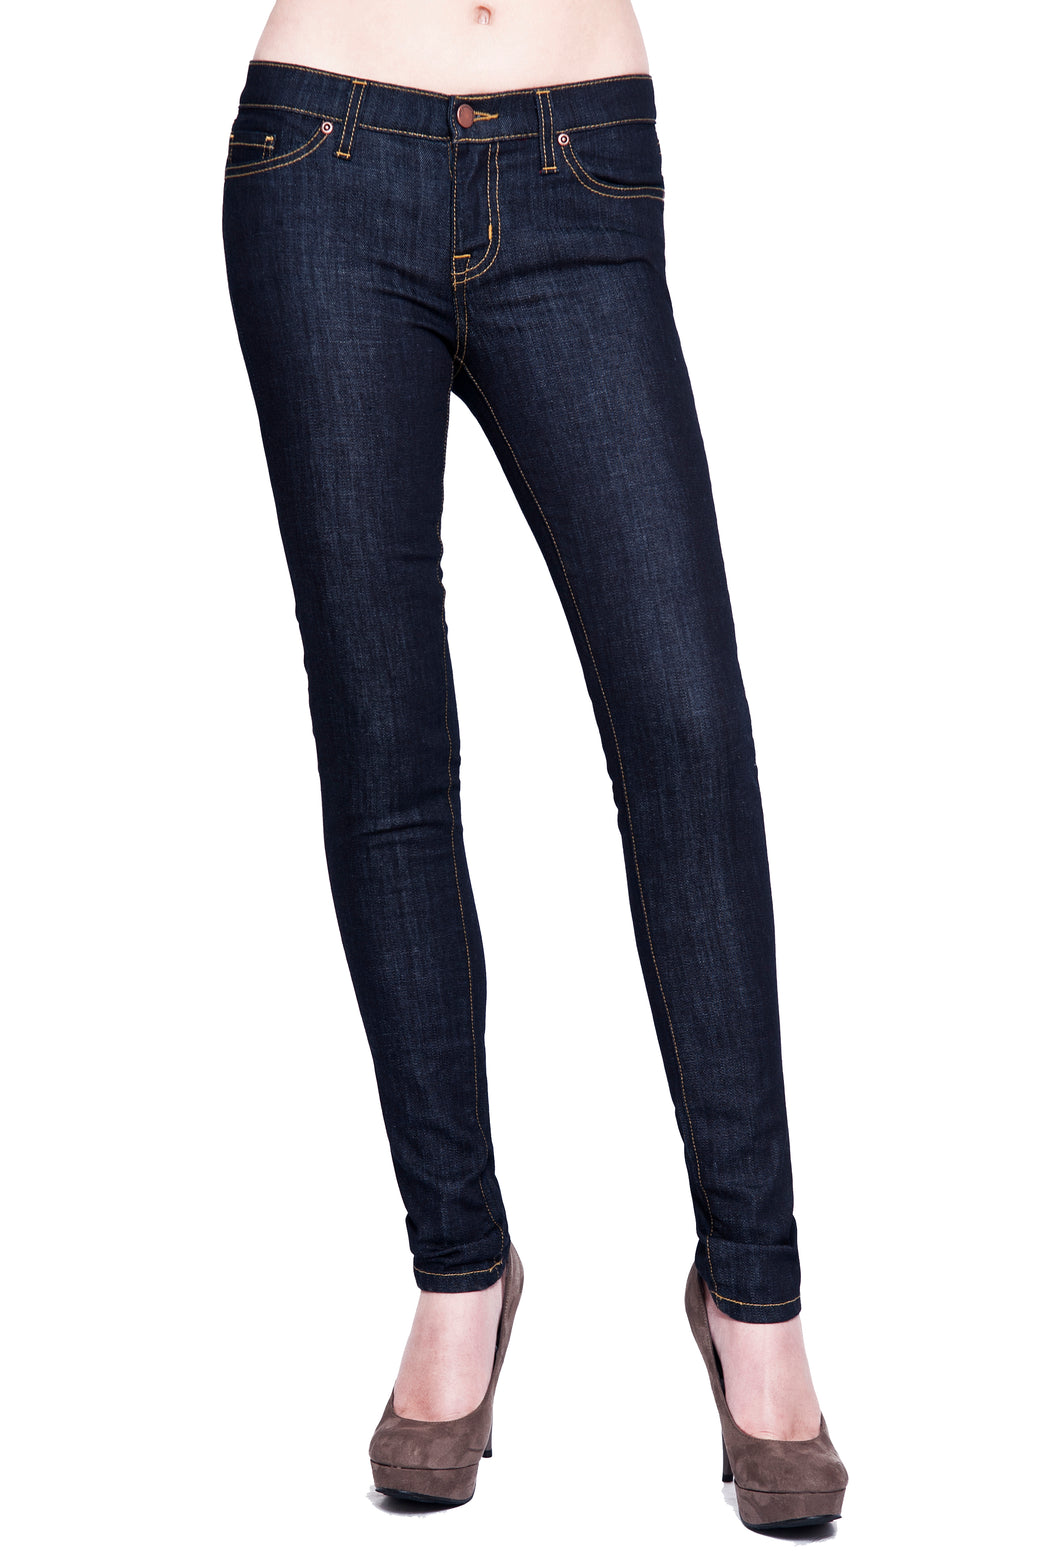 Candy Tight Dark Blue Skinny Jean - LIMITED EDITION